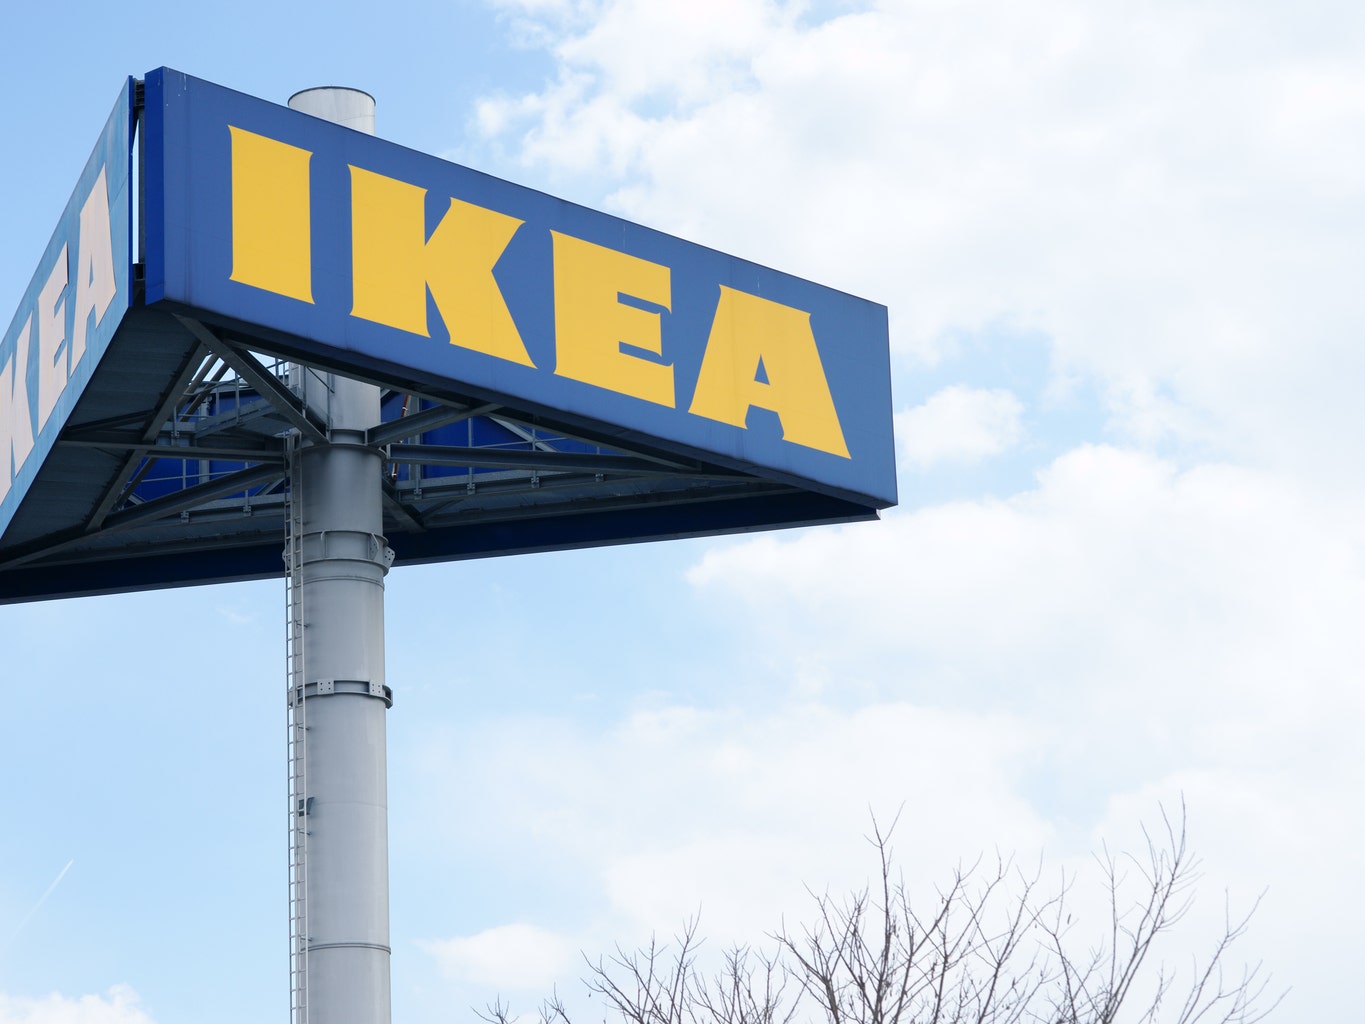 ICYMI: Analysis: IKEA is expanding. For Boise 'stars have to line up